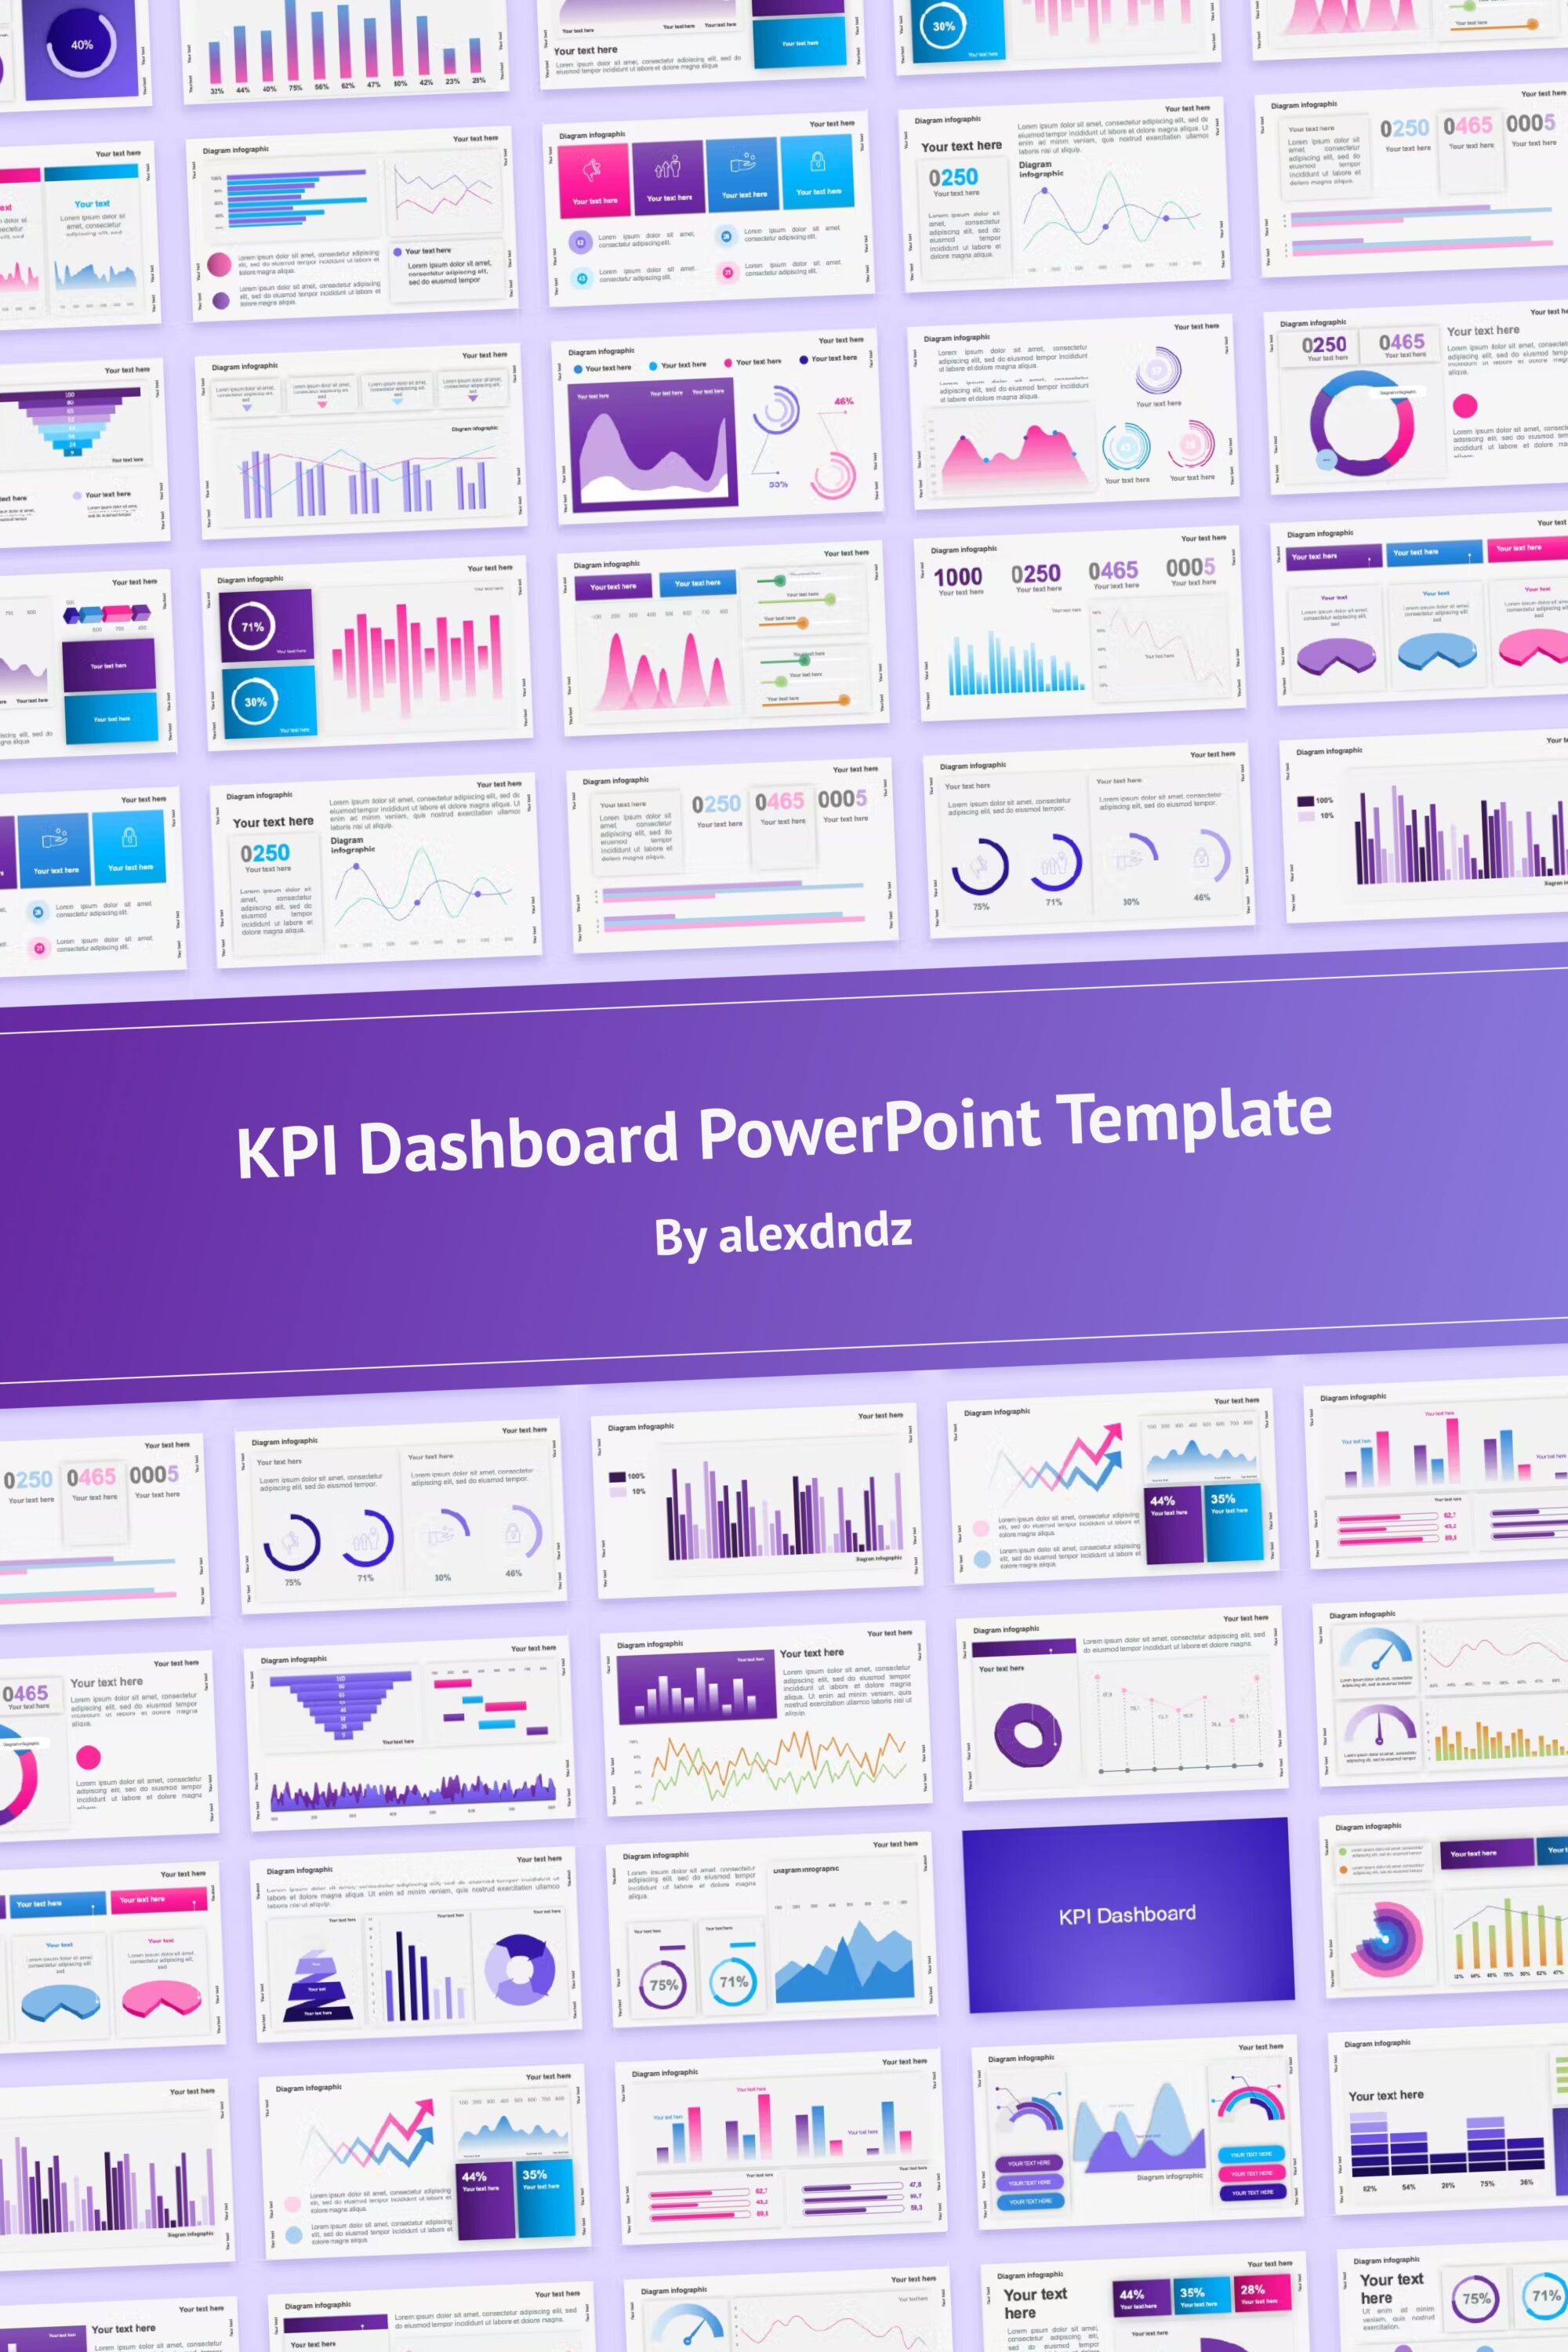 KPI Dashboard PowerPoint Template - pinterest image preview.